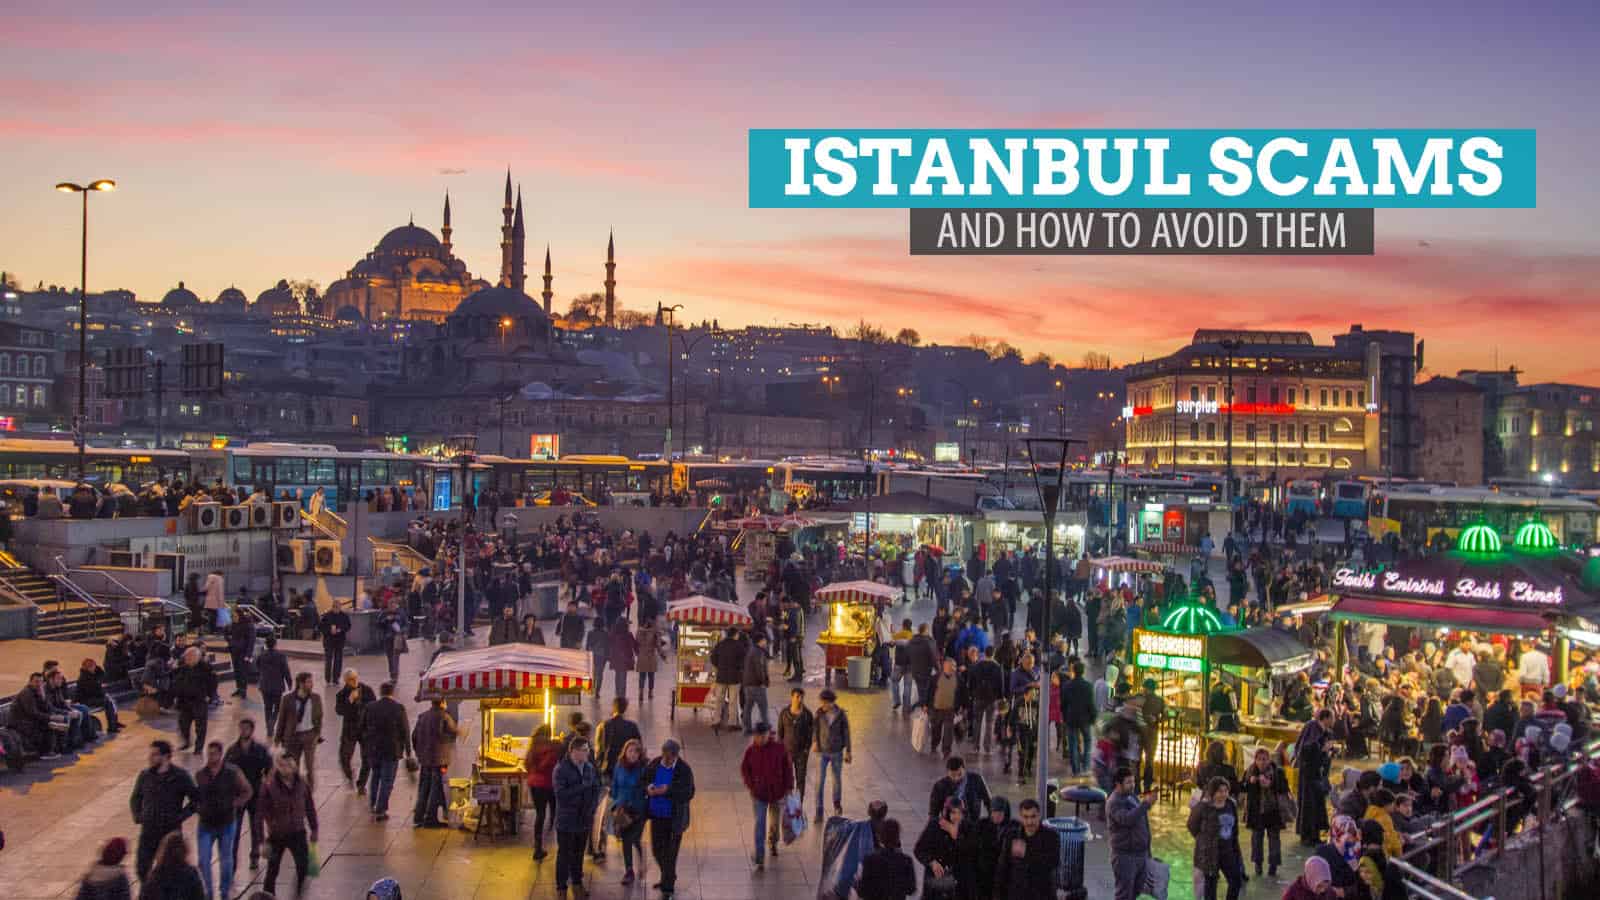 ISTANBUL: Top 5 Scams to Watch Out for (And How to Avoid Them)